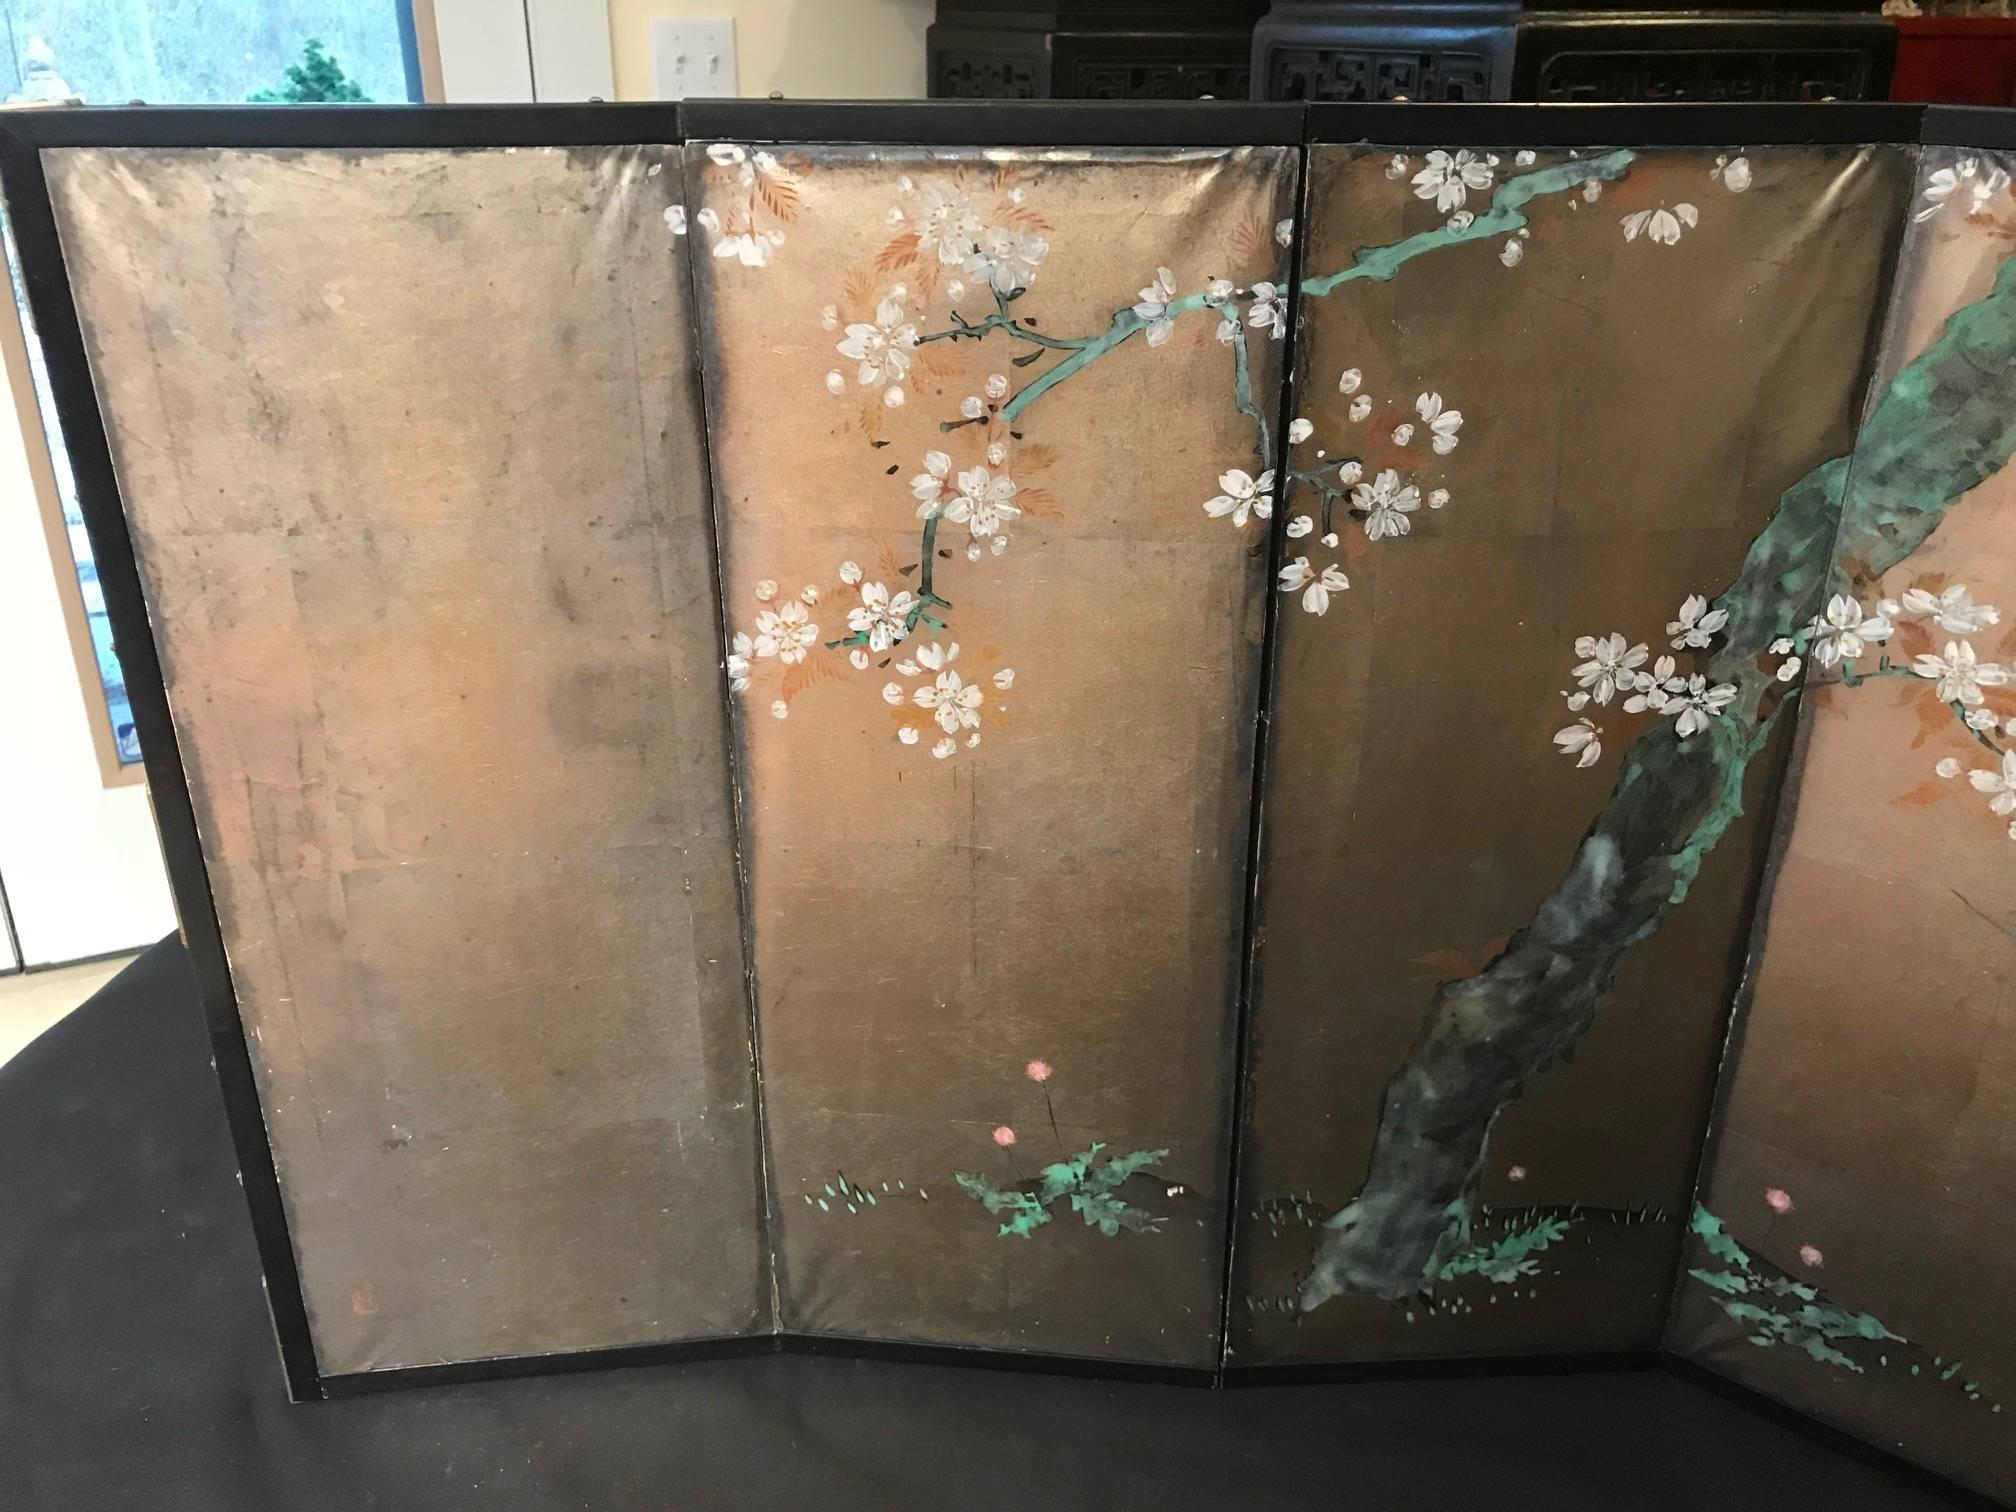 FEBRUARY SALE - NOW SAVE 25% AND MORE

A very fine early small-scale Japanese antique hand-painted six-panel folding screen byobu conceived in a convenient size 18 inches high and 43.5 inches length. It has been beautifully hand drawn on paper in a